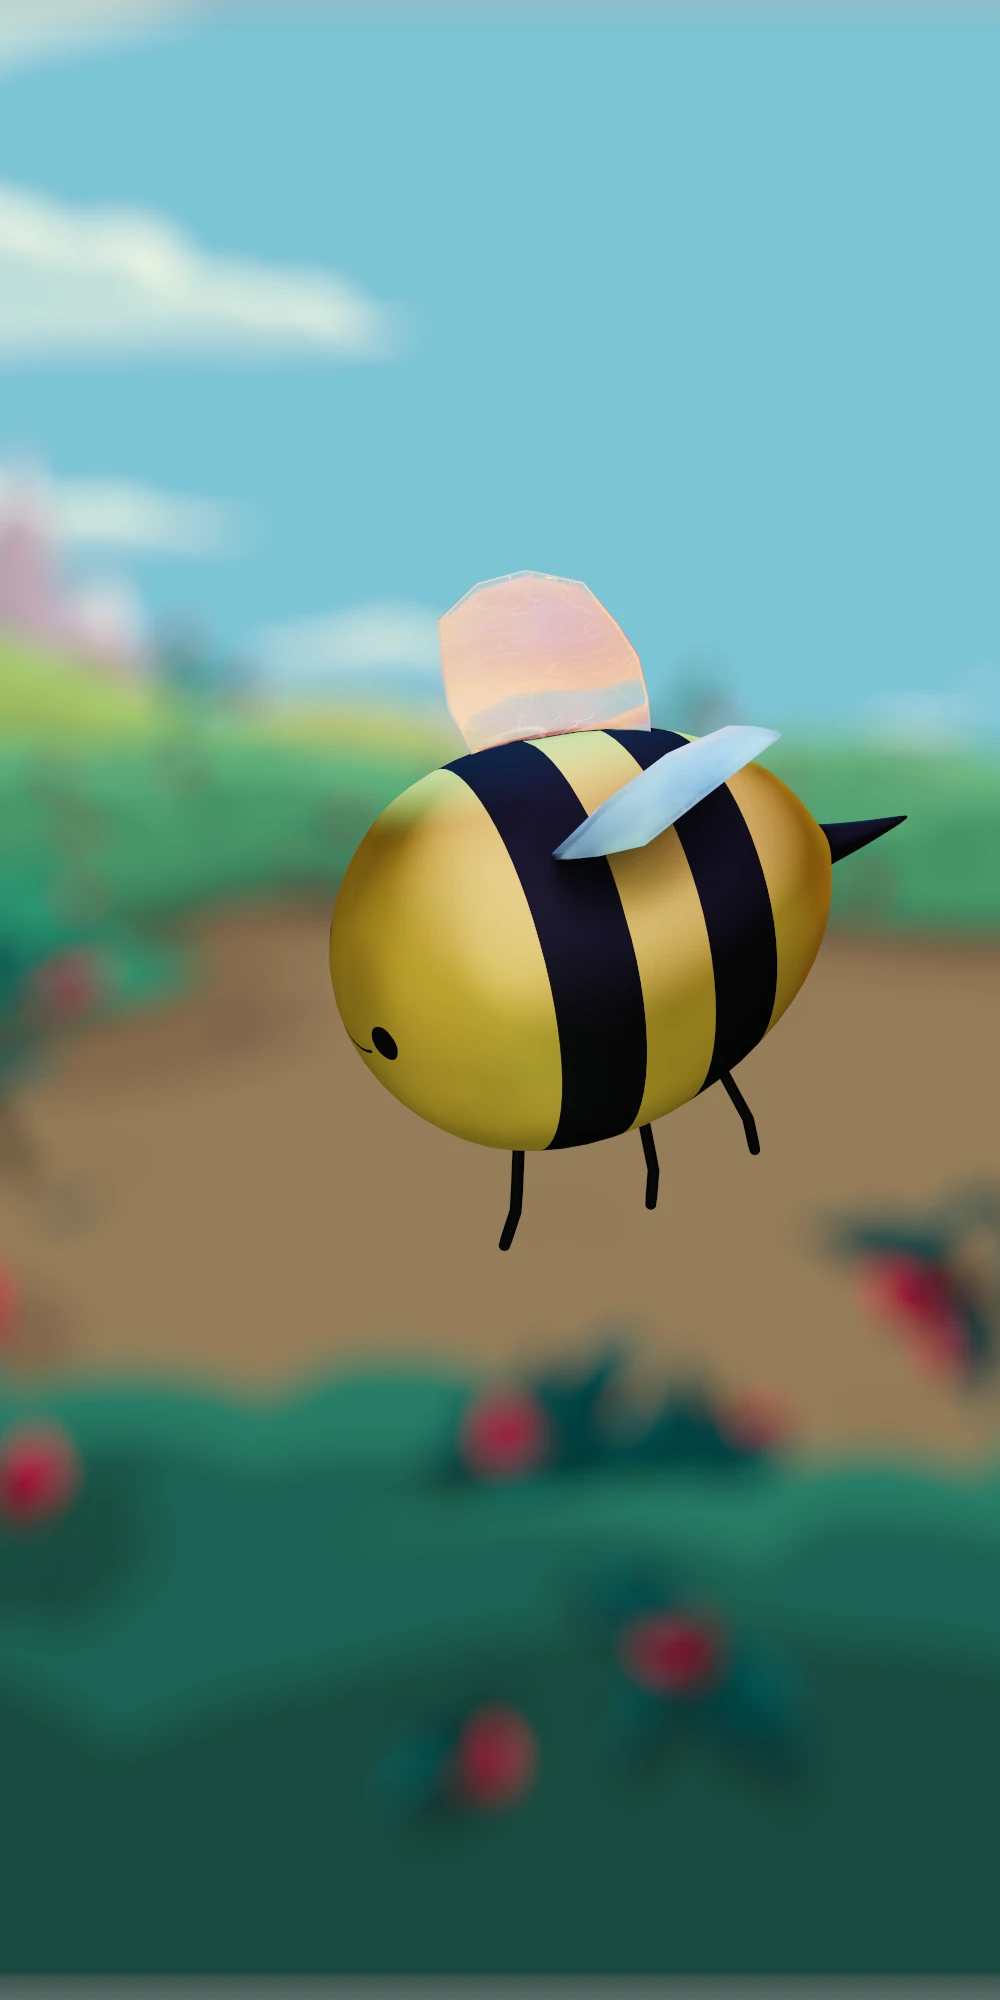 A stylistic bee flying